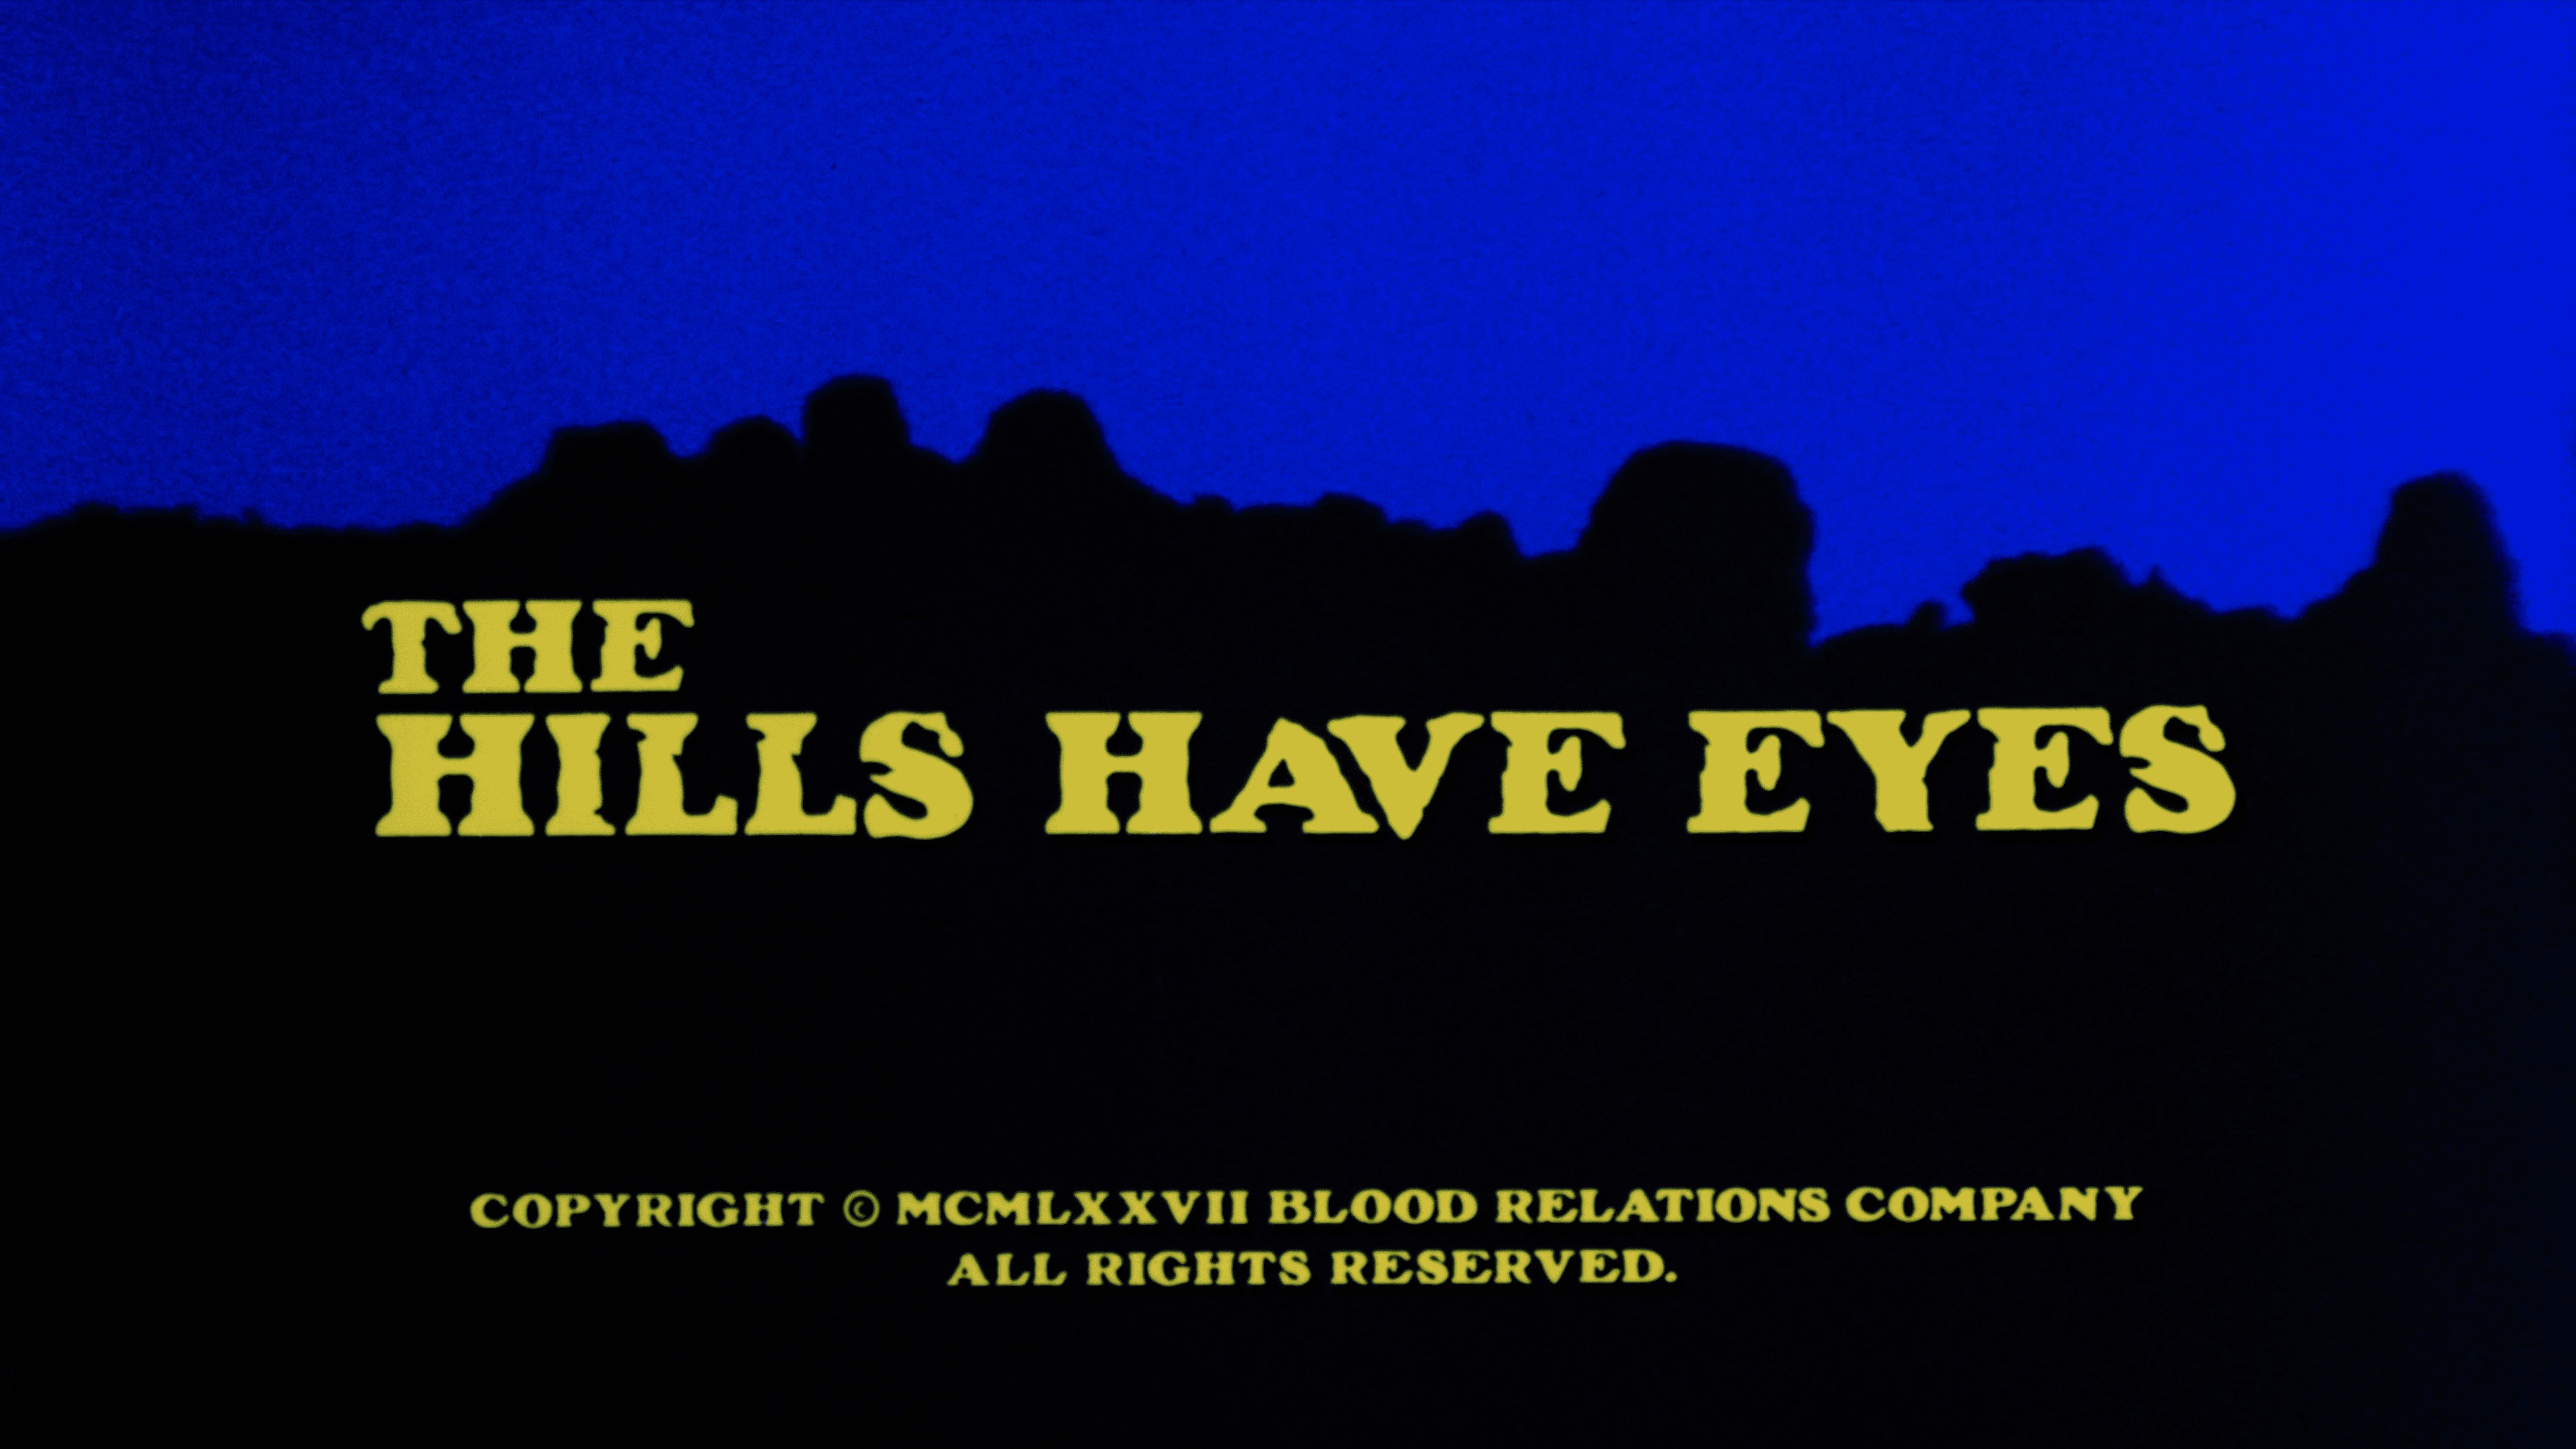 THE HILLS HAVE EYES 4K TITLE